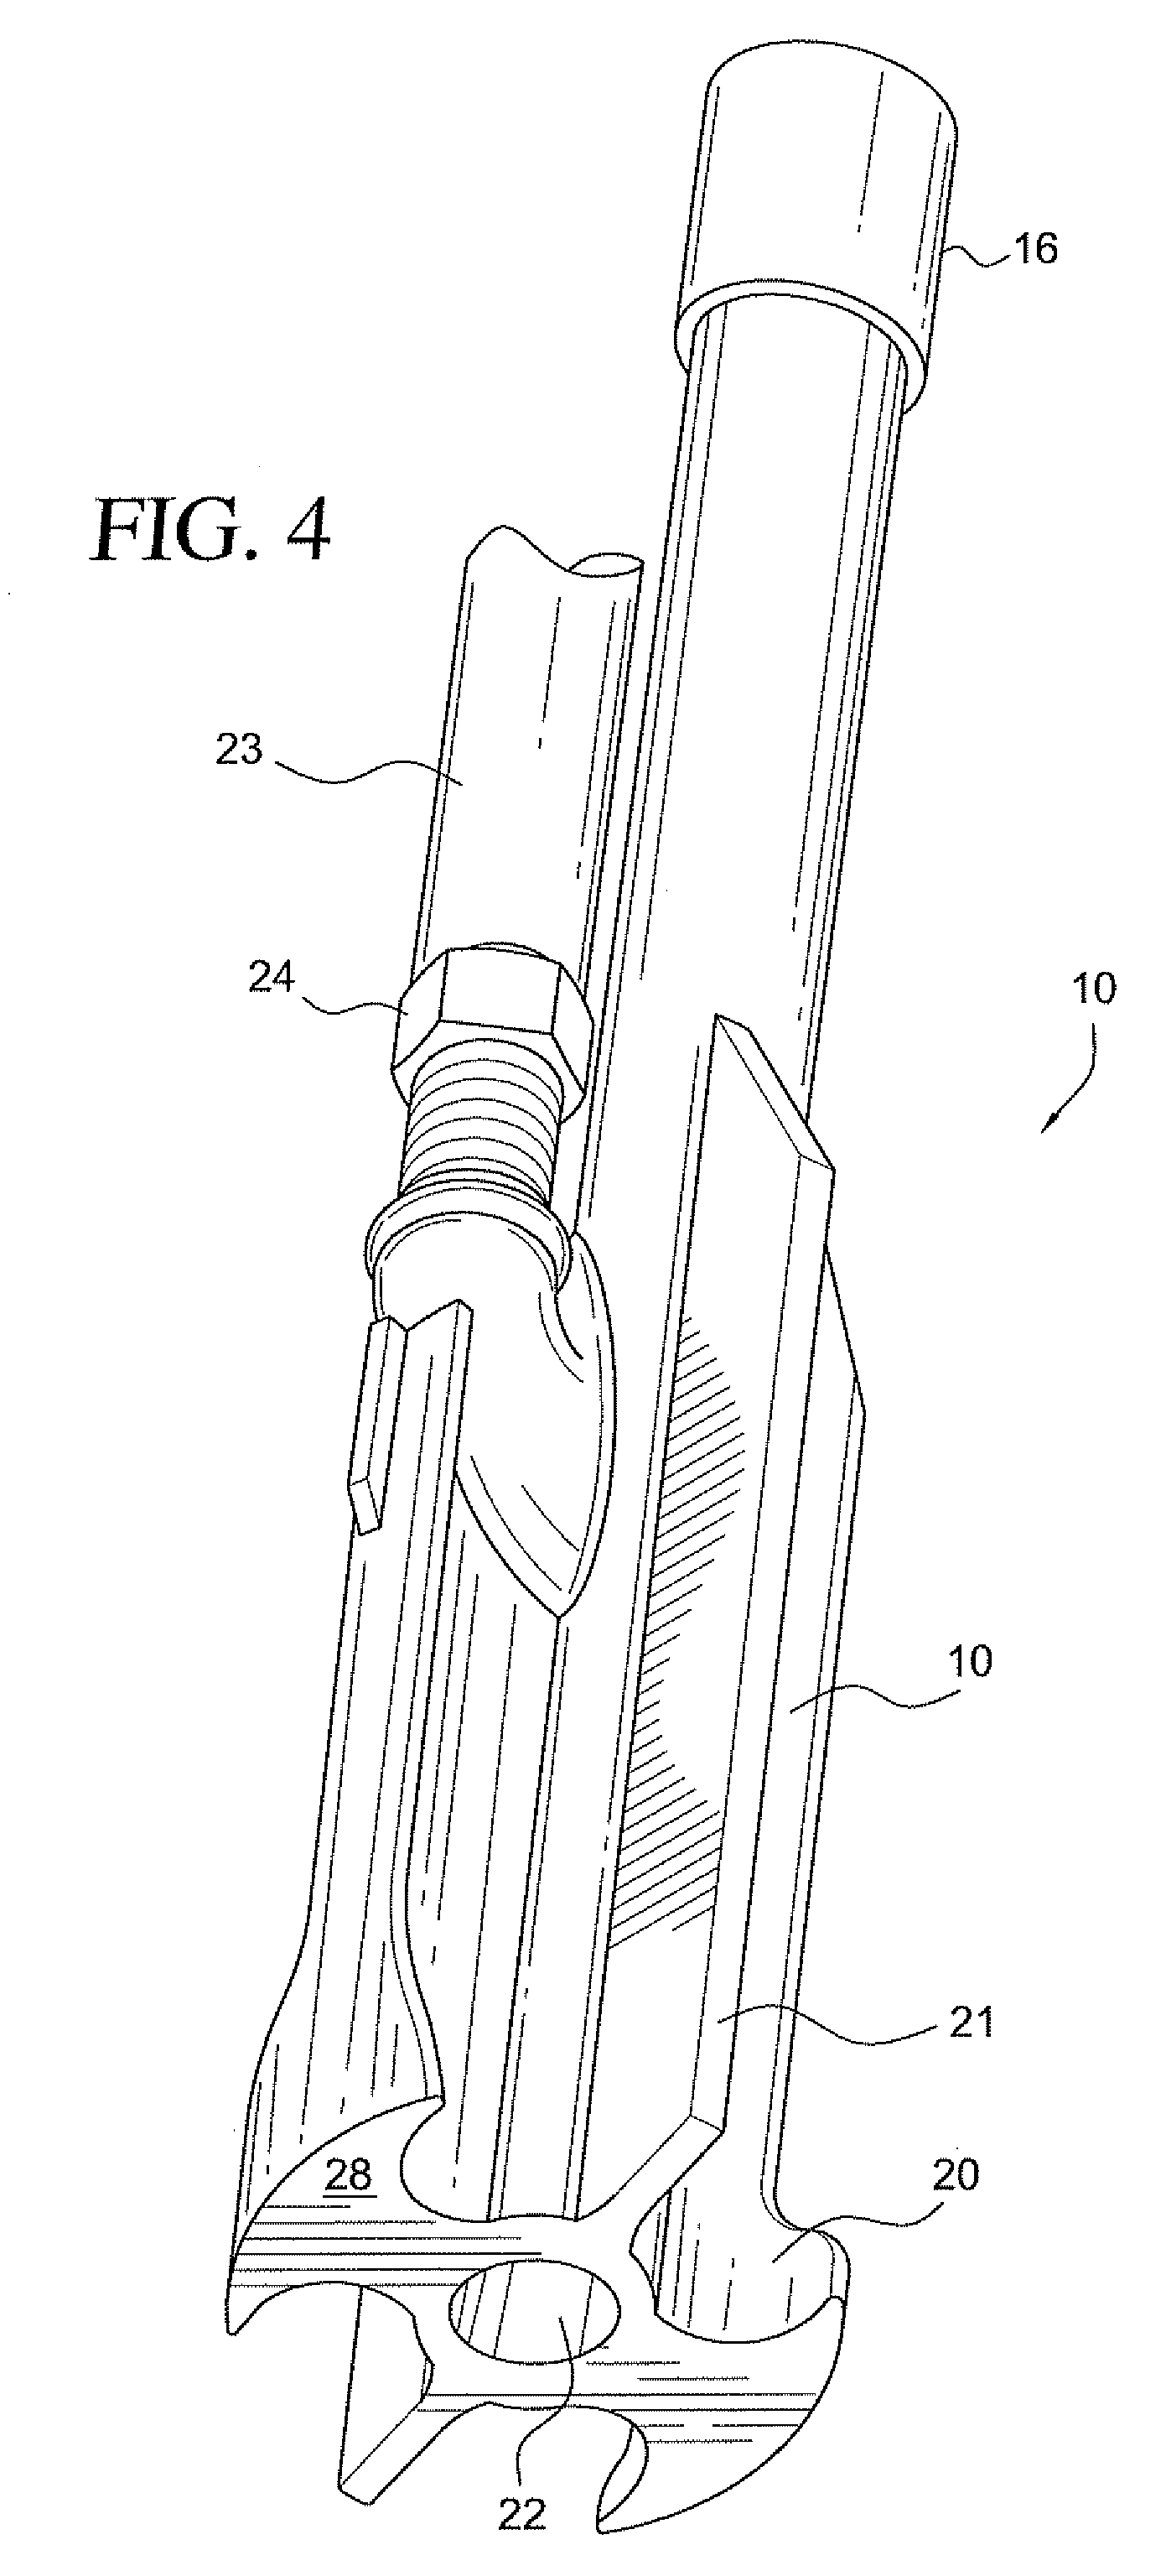 Method of installing geothermal heat pump system and device for installation